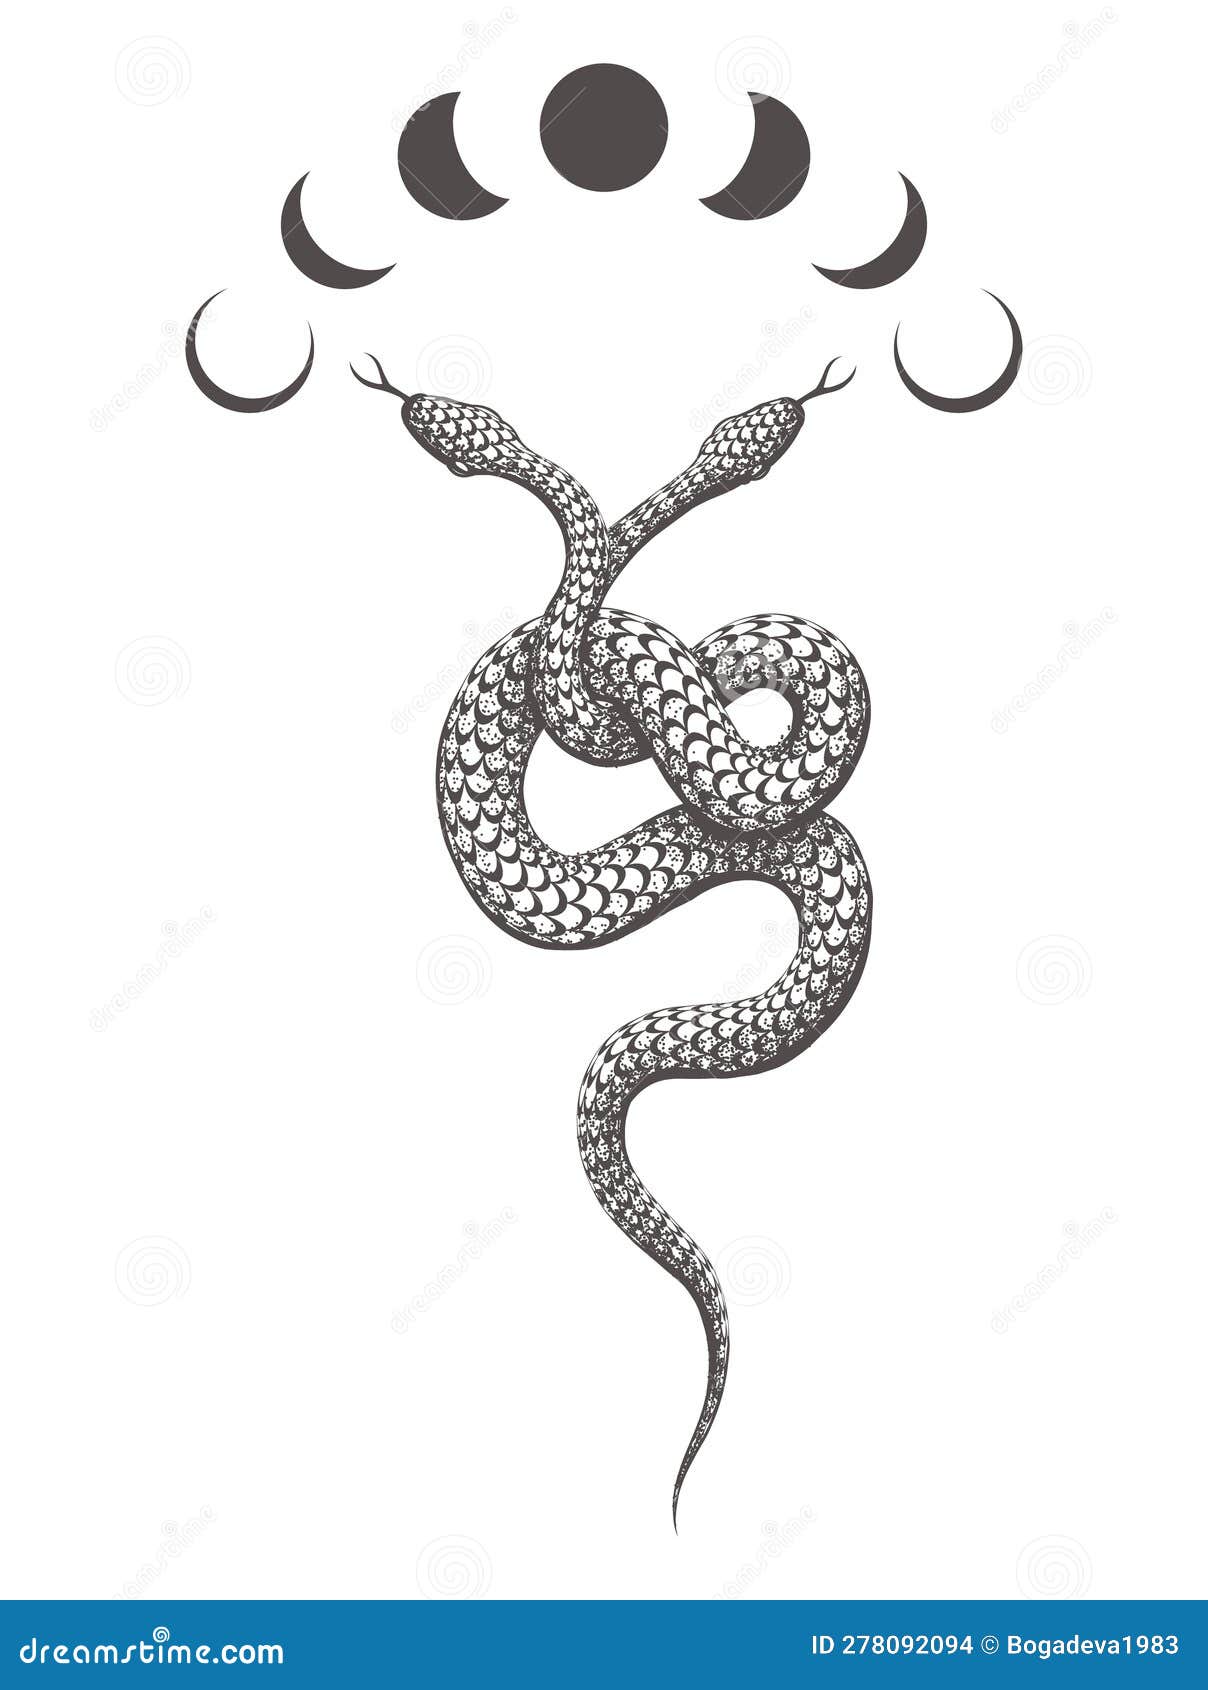 two headed snake phases moon esoteric tattoo isolated white vector illustration 278092094